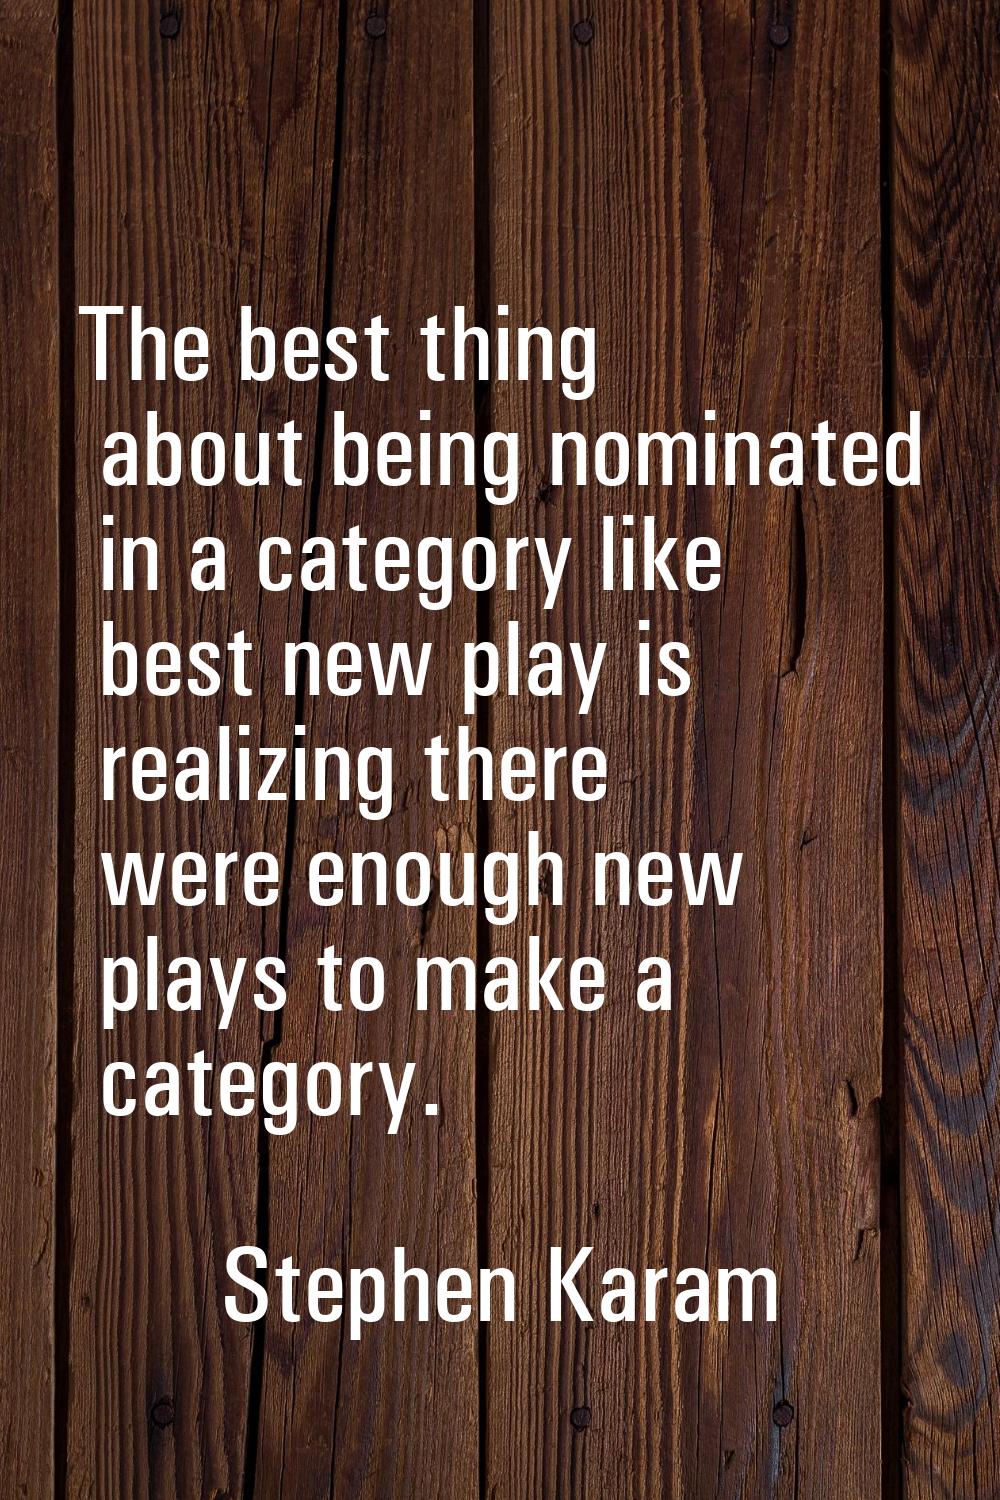 The best thing about being nominated in a category like best new play is realizing there were enoug